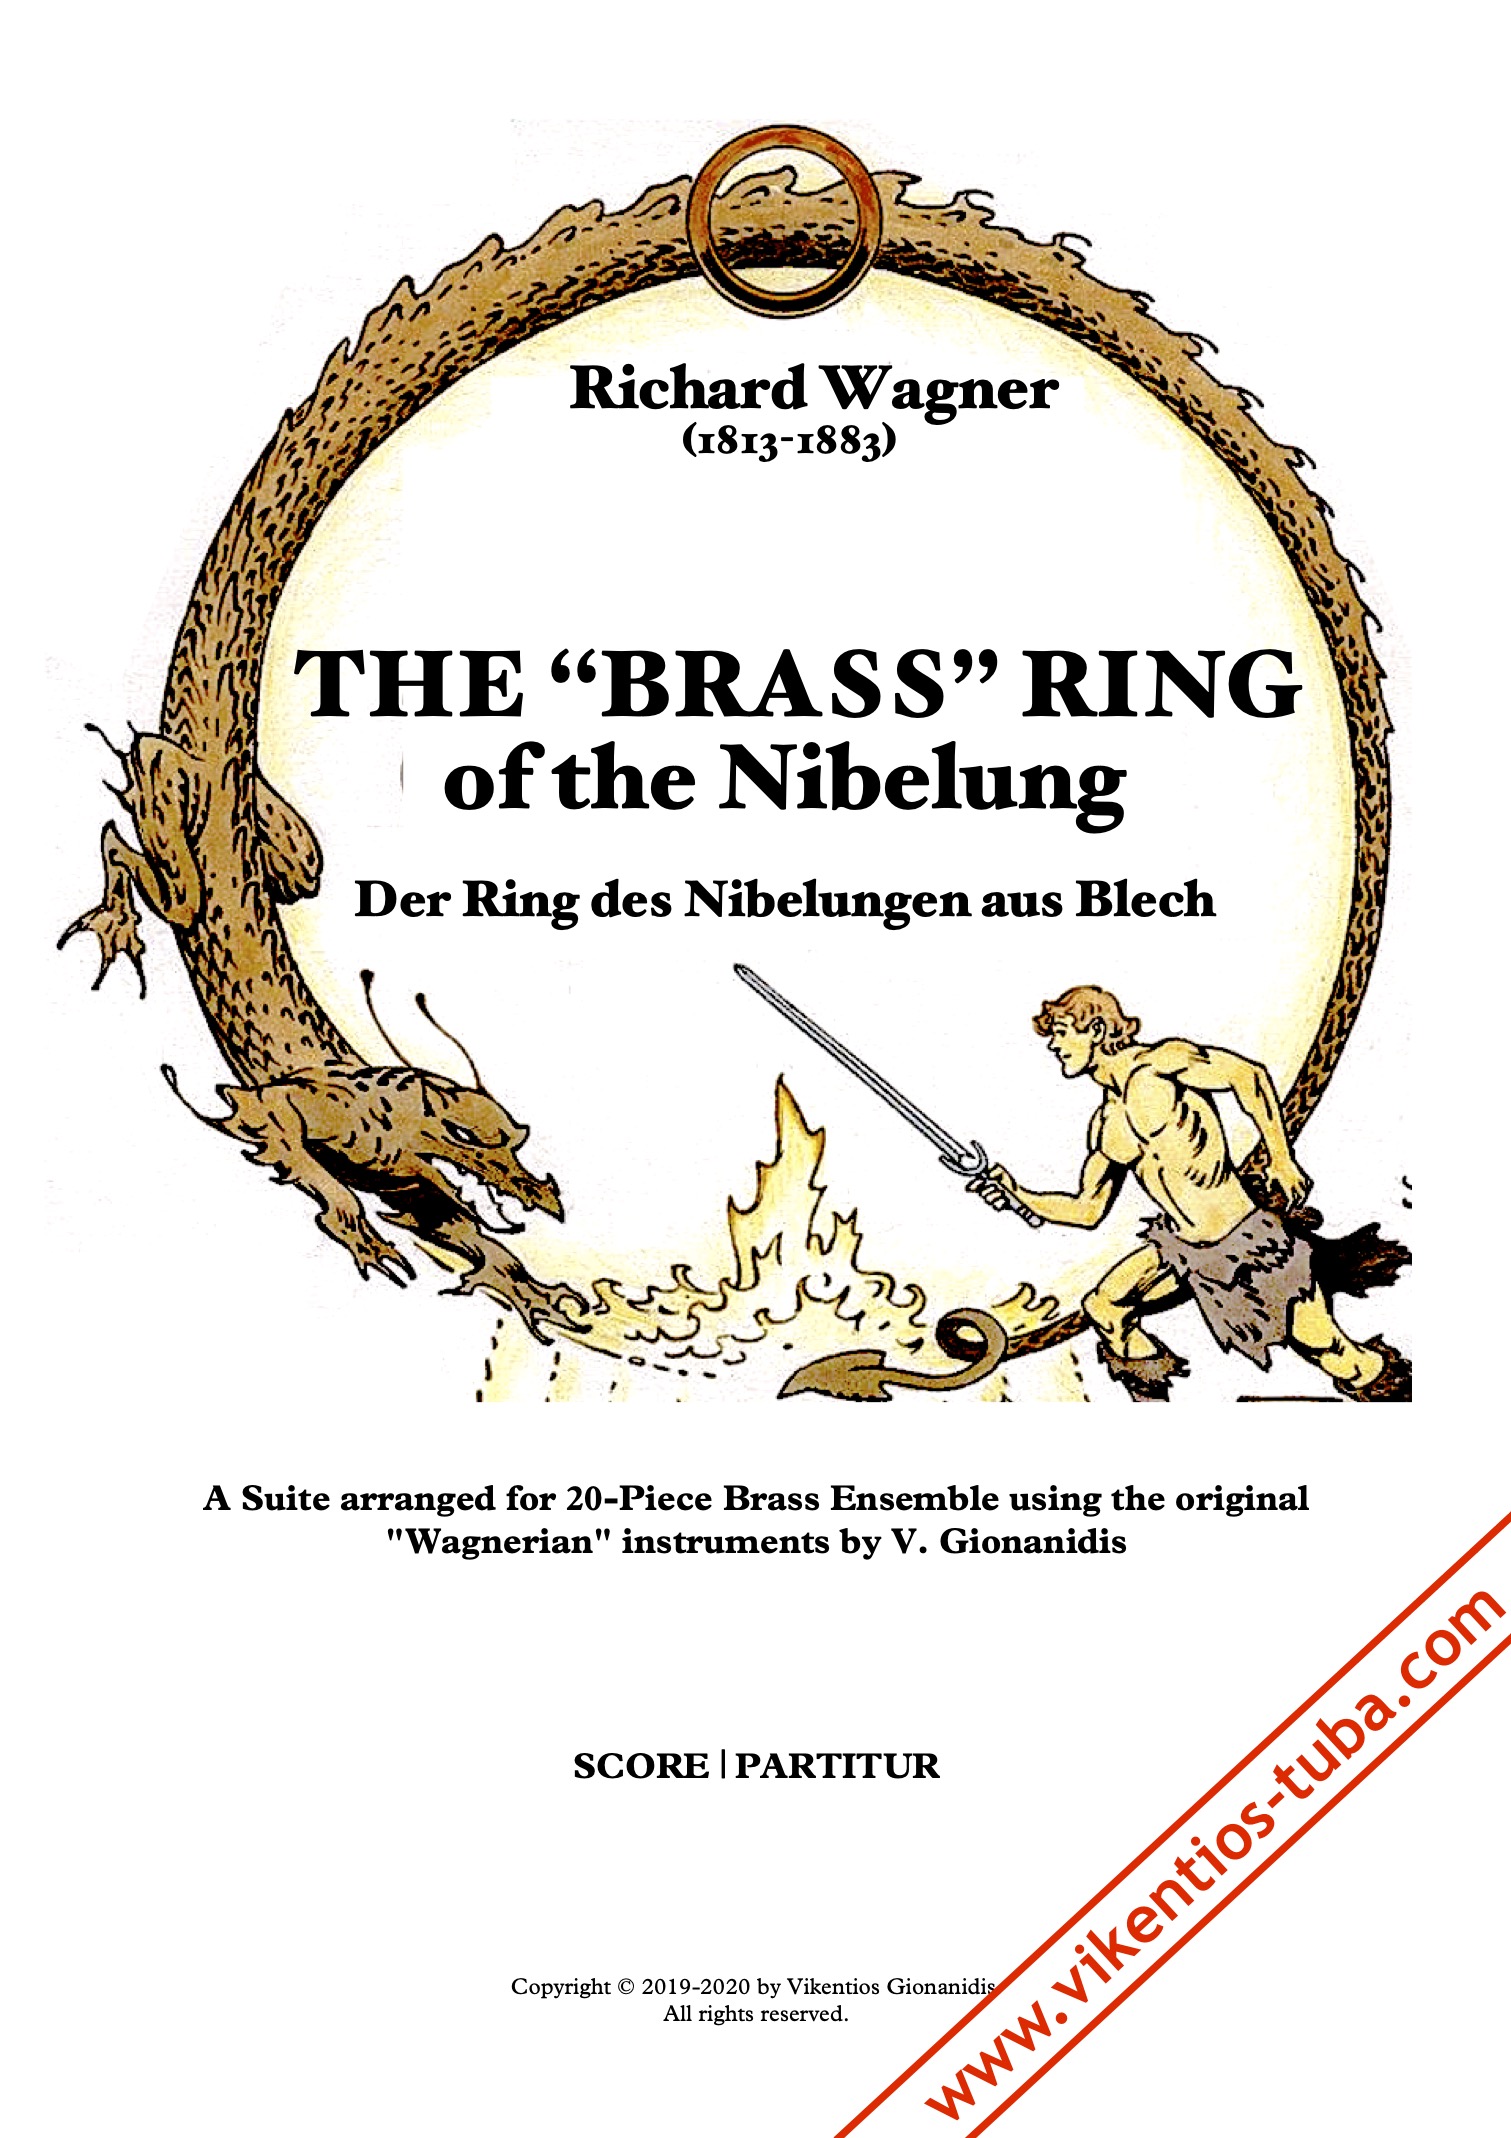 Richard Wagner, Klaus Tennstedt, Berlin Philharmonic Orchestra - Wagner:  Music from The Ring of The Nibelung - Amazon.com Music